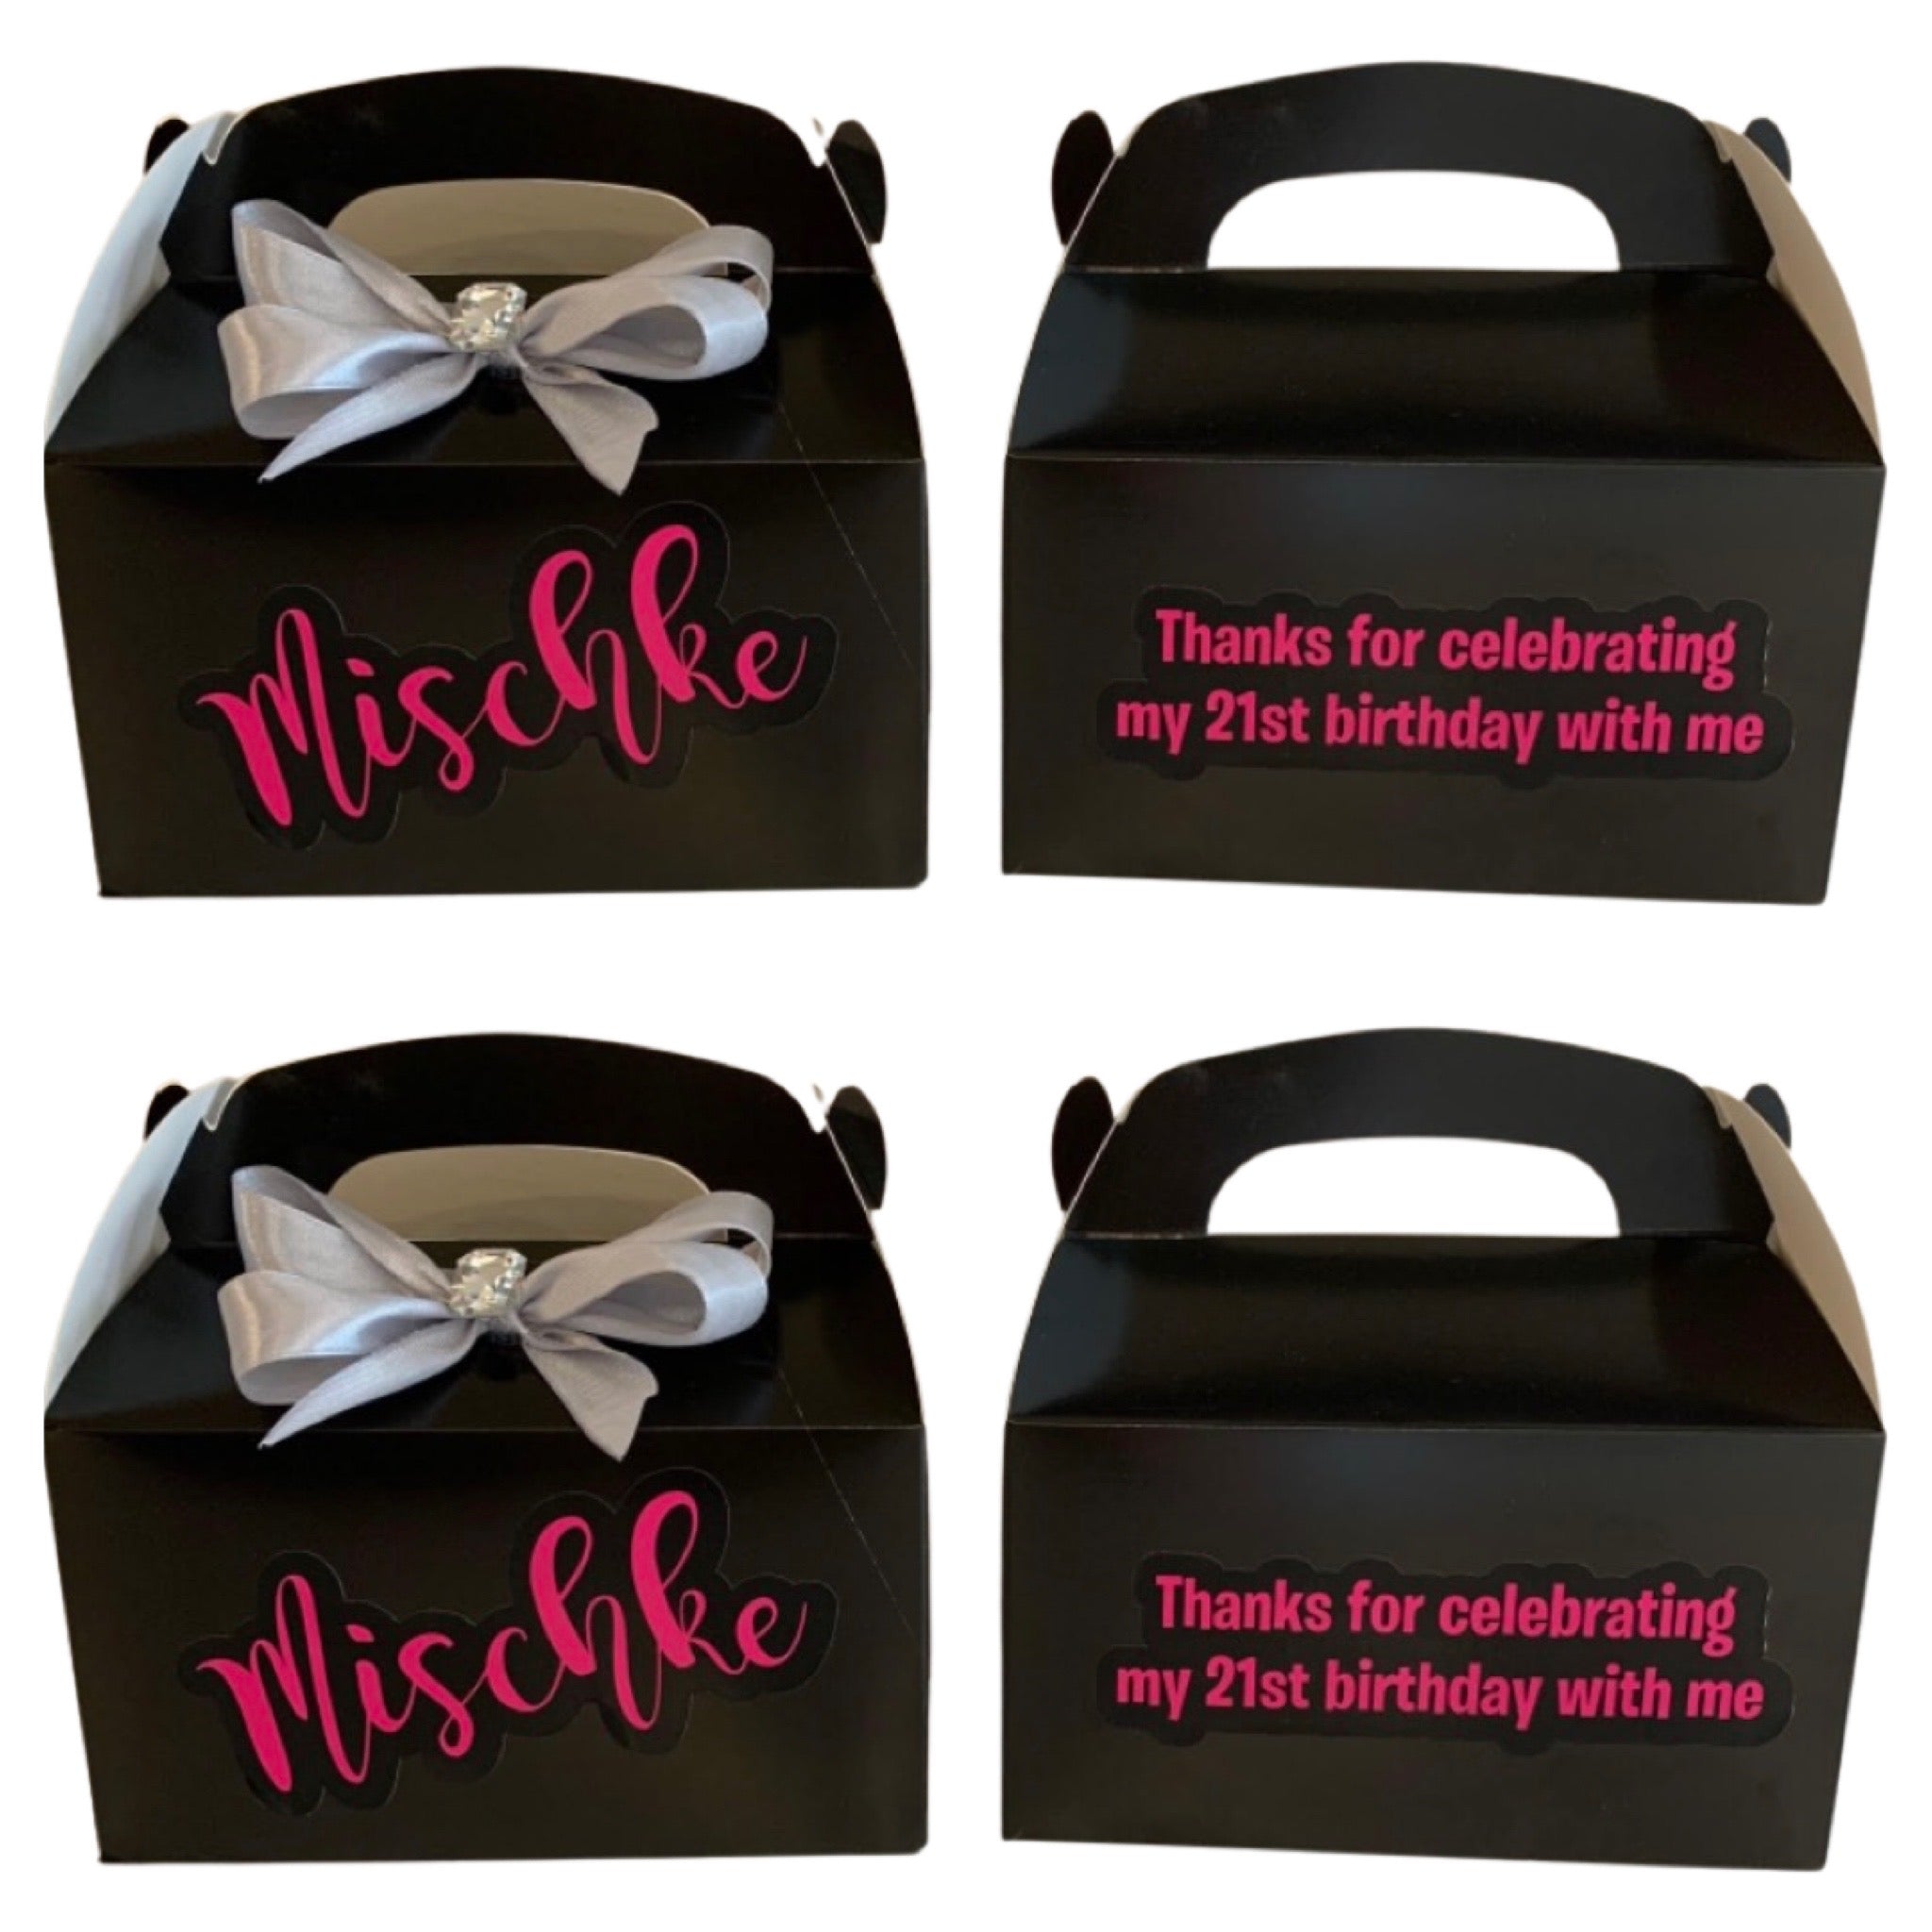 Personalised gift box with bow